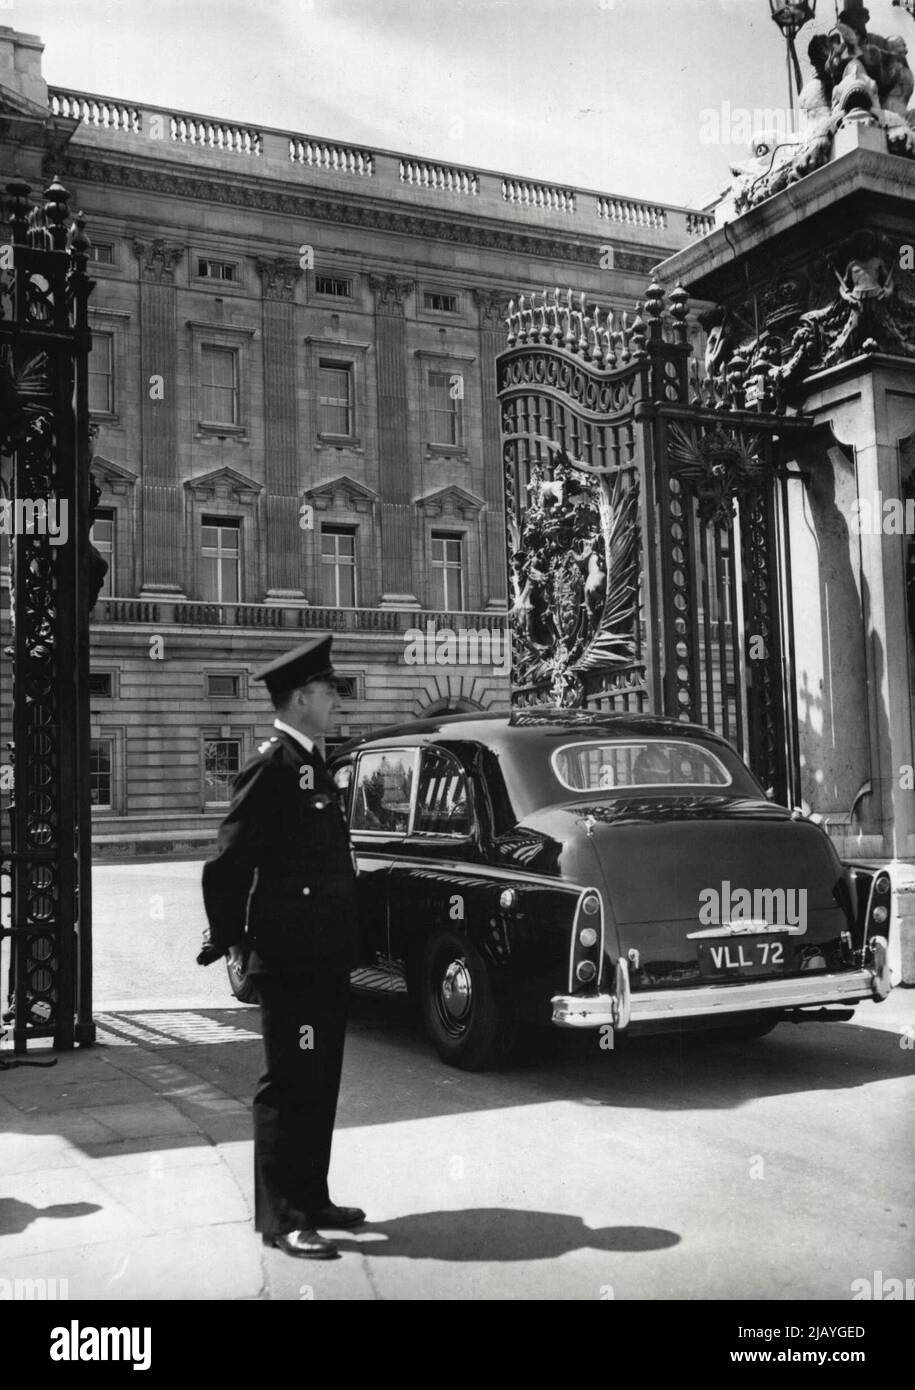 Australian Premier Lunches With The Queen - A car containing Mr. Robert Menzies, the Australian Premier, goes through the gates of Buckingham Palace today; the Australian Premier was to lunch with Her Majesty Queen Elizabeth. June 2, 1949. (Photo by United Press International Photo). Stock Photo